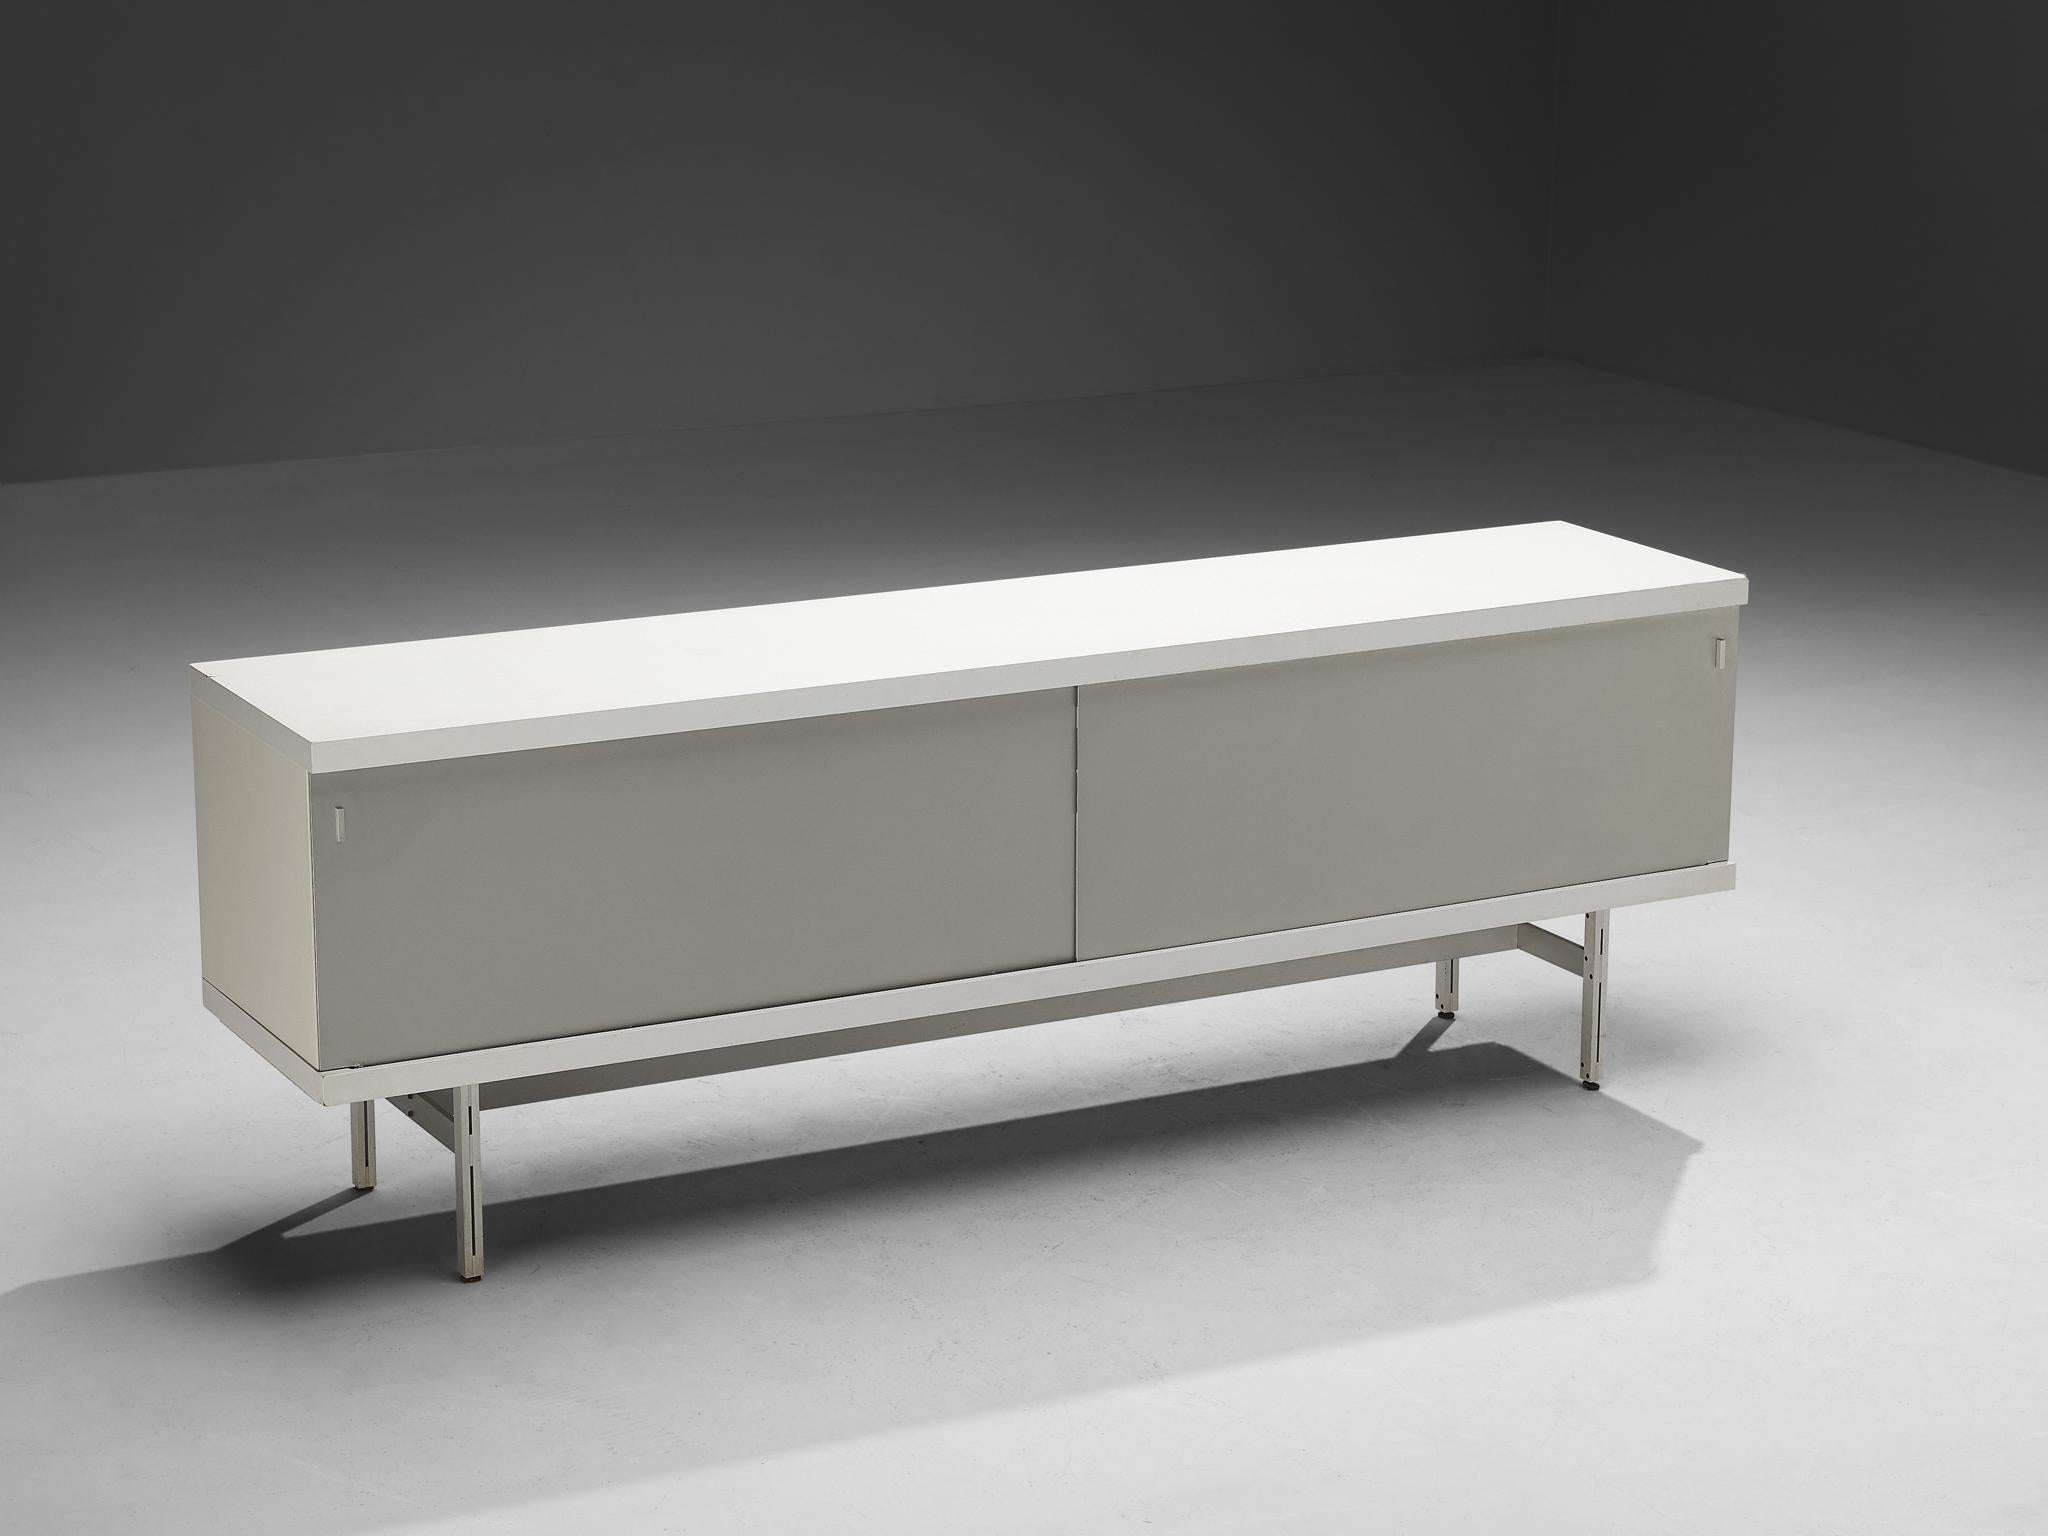 Horst Brüning for Behr Germany, sideboard, model 1730, laminated wood, aluminum, Germany, 1960

Pure and minimalist in its execution, this sideboard model 1730 is designed by Horst Brüning. The rectangular-shaped corpus features a white frame with